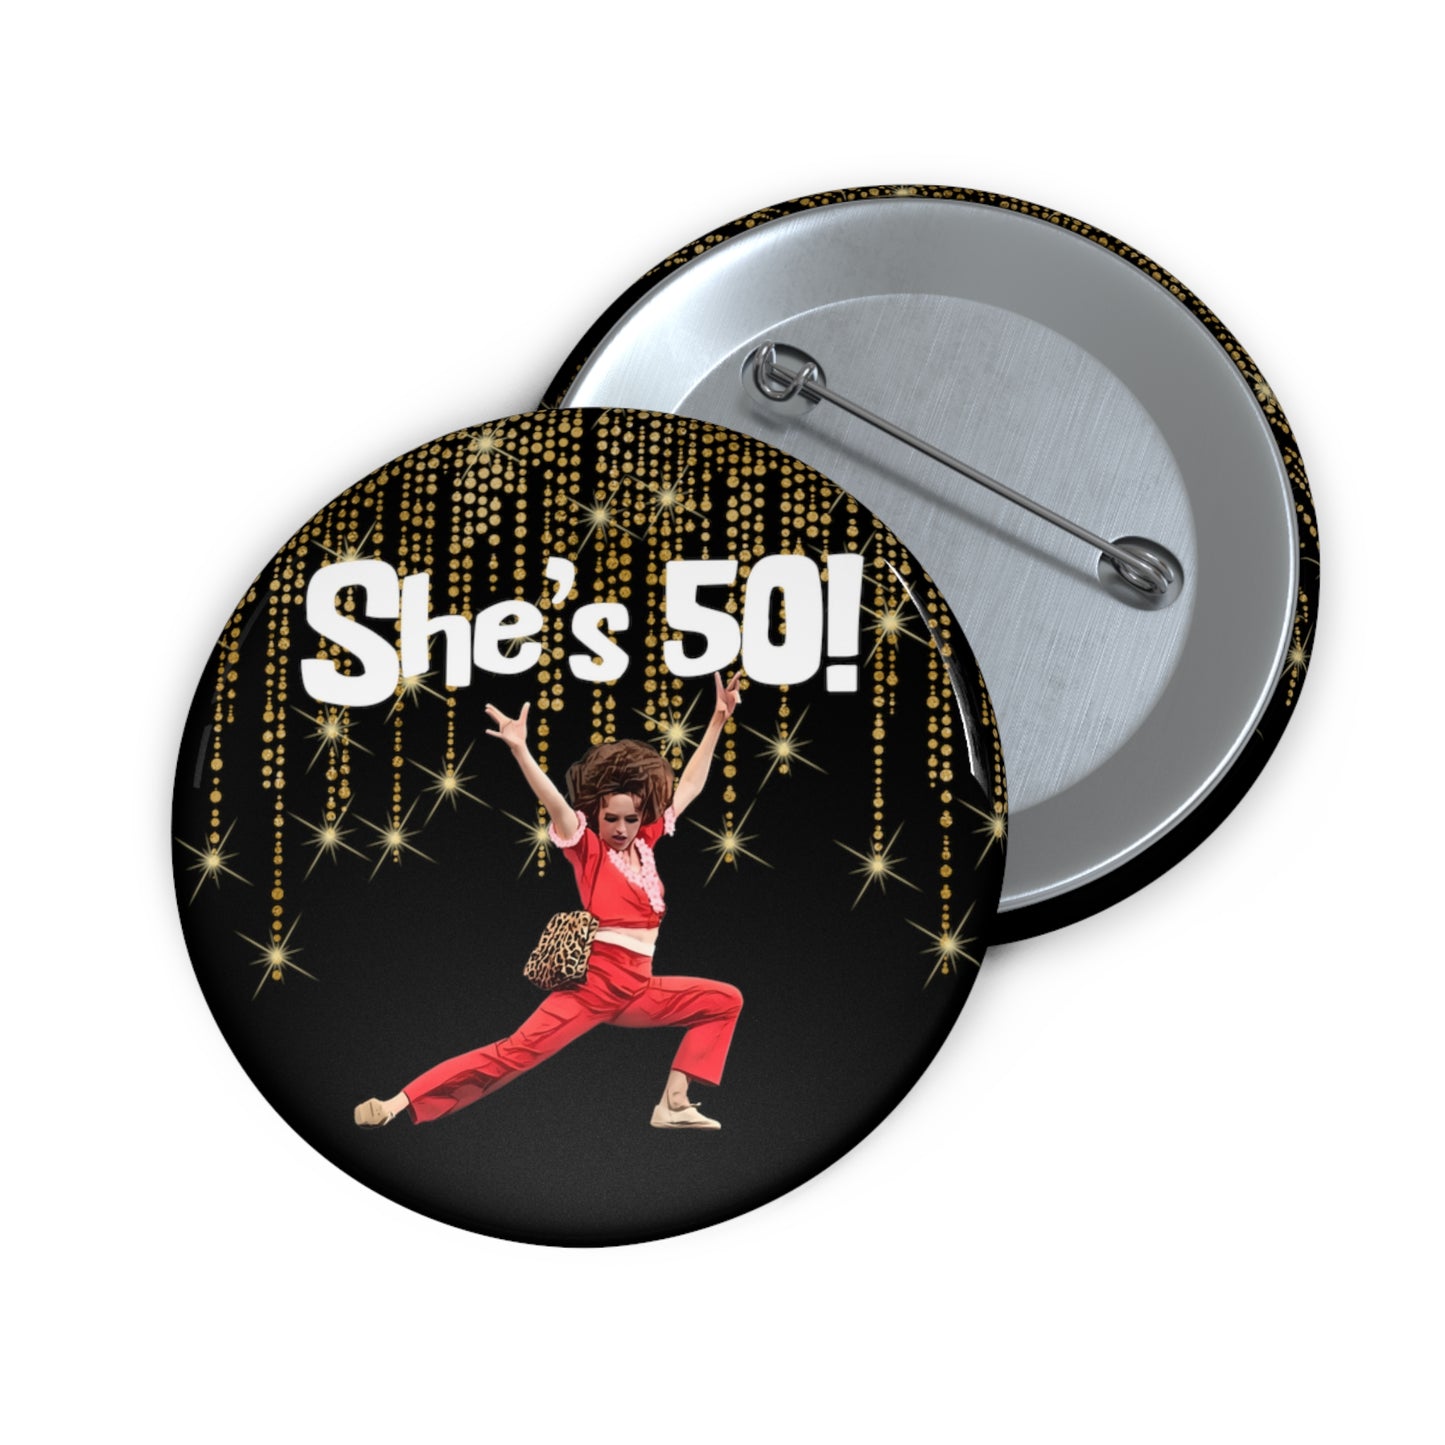 She's 50, Sally O'Malley Button Pin, Molly Shannon, I like to Kick and Stretch